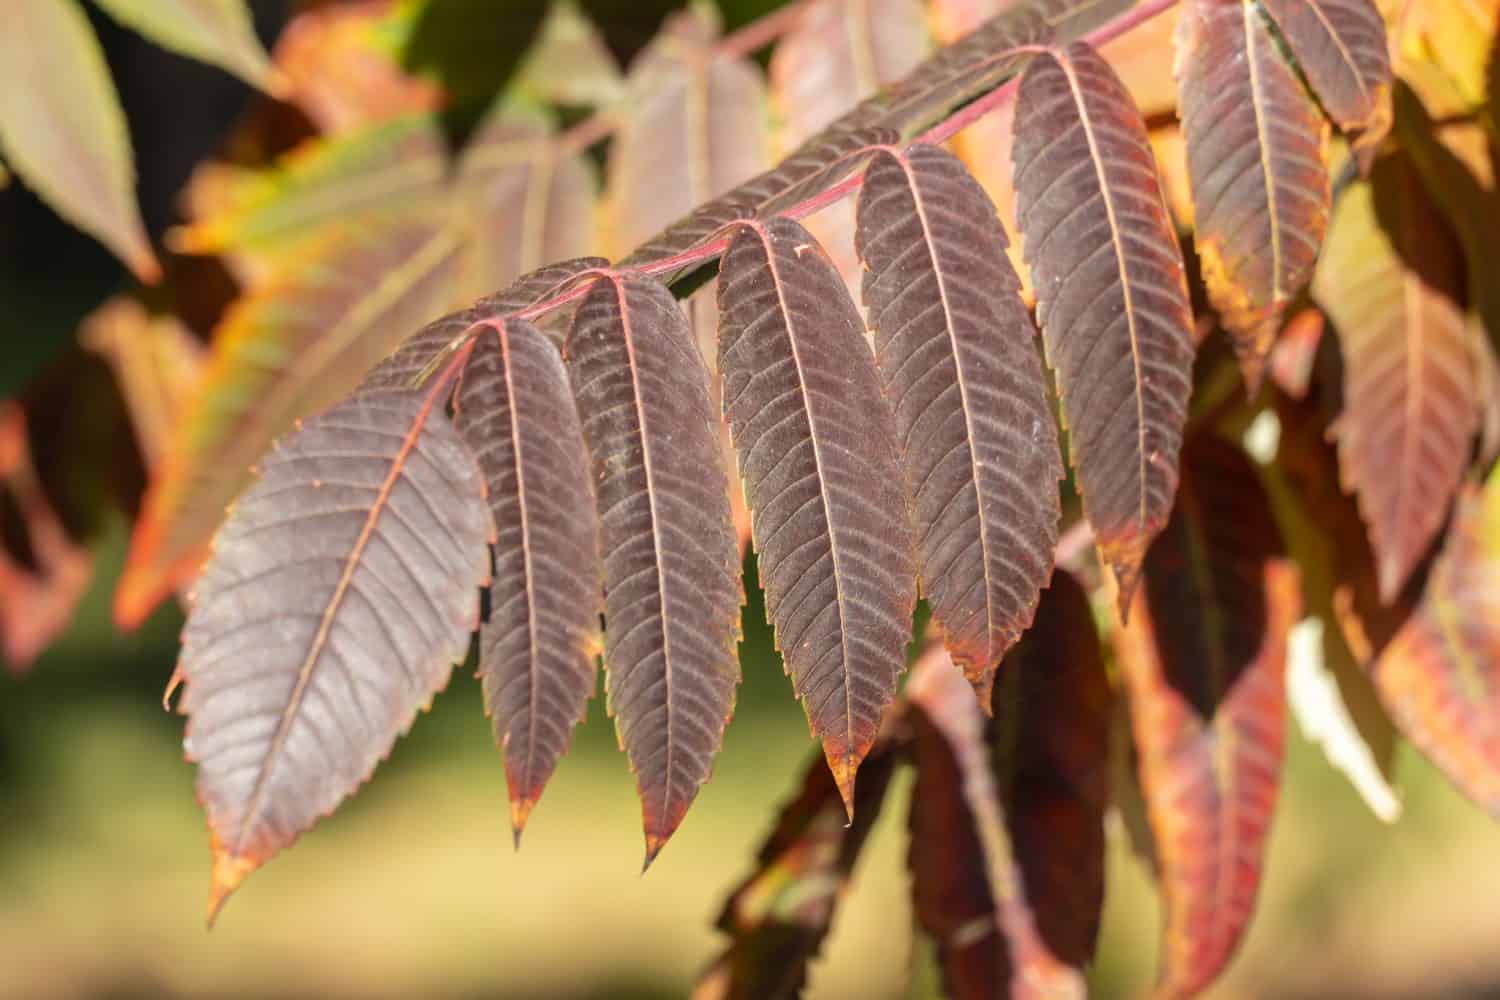 Brown leaf of сanadian sumac in autumn garden. Rhus tree of family anacardiaceae. Orange leave of deciduous shrub. Spice from ground berries of type sumac. Autumn foliage pattern. Natural background.